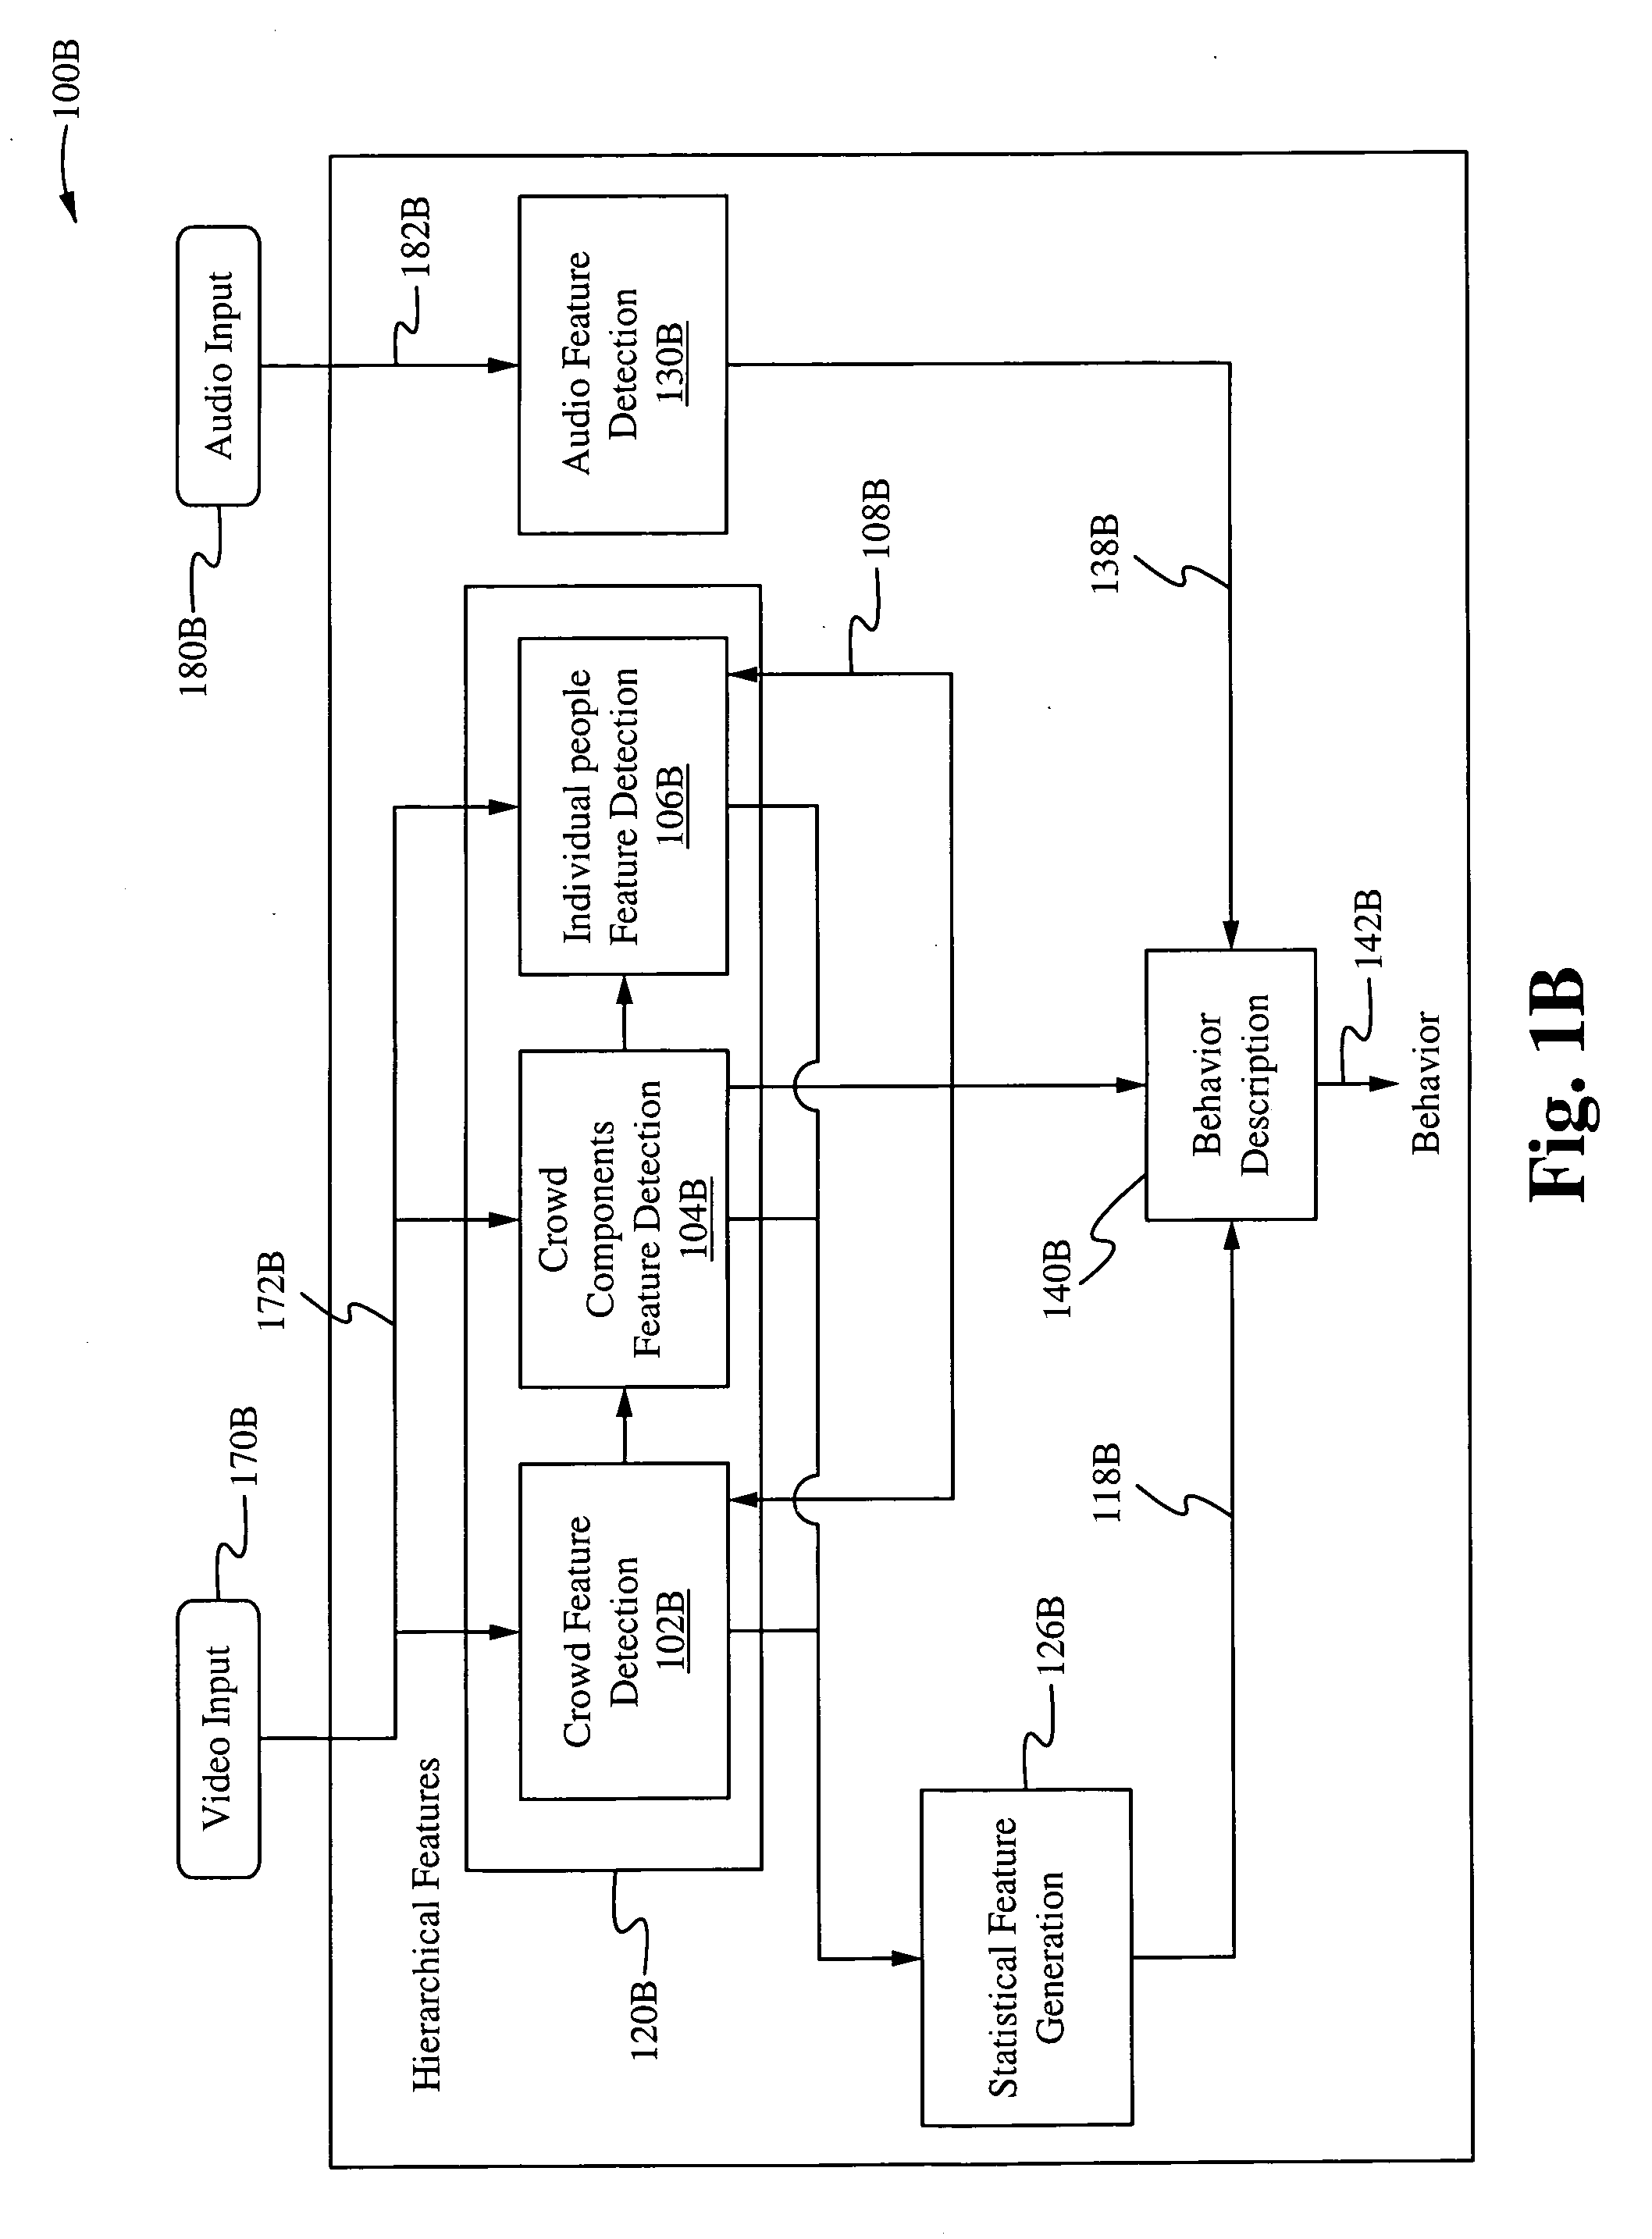 Method of and system for hierarchical human/crowd behavior detection